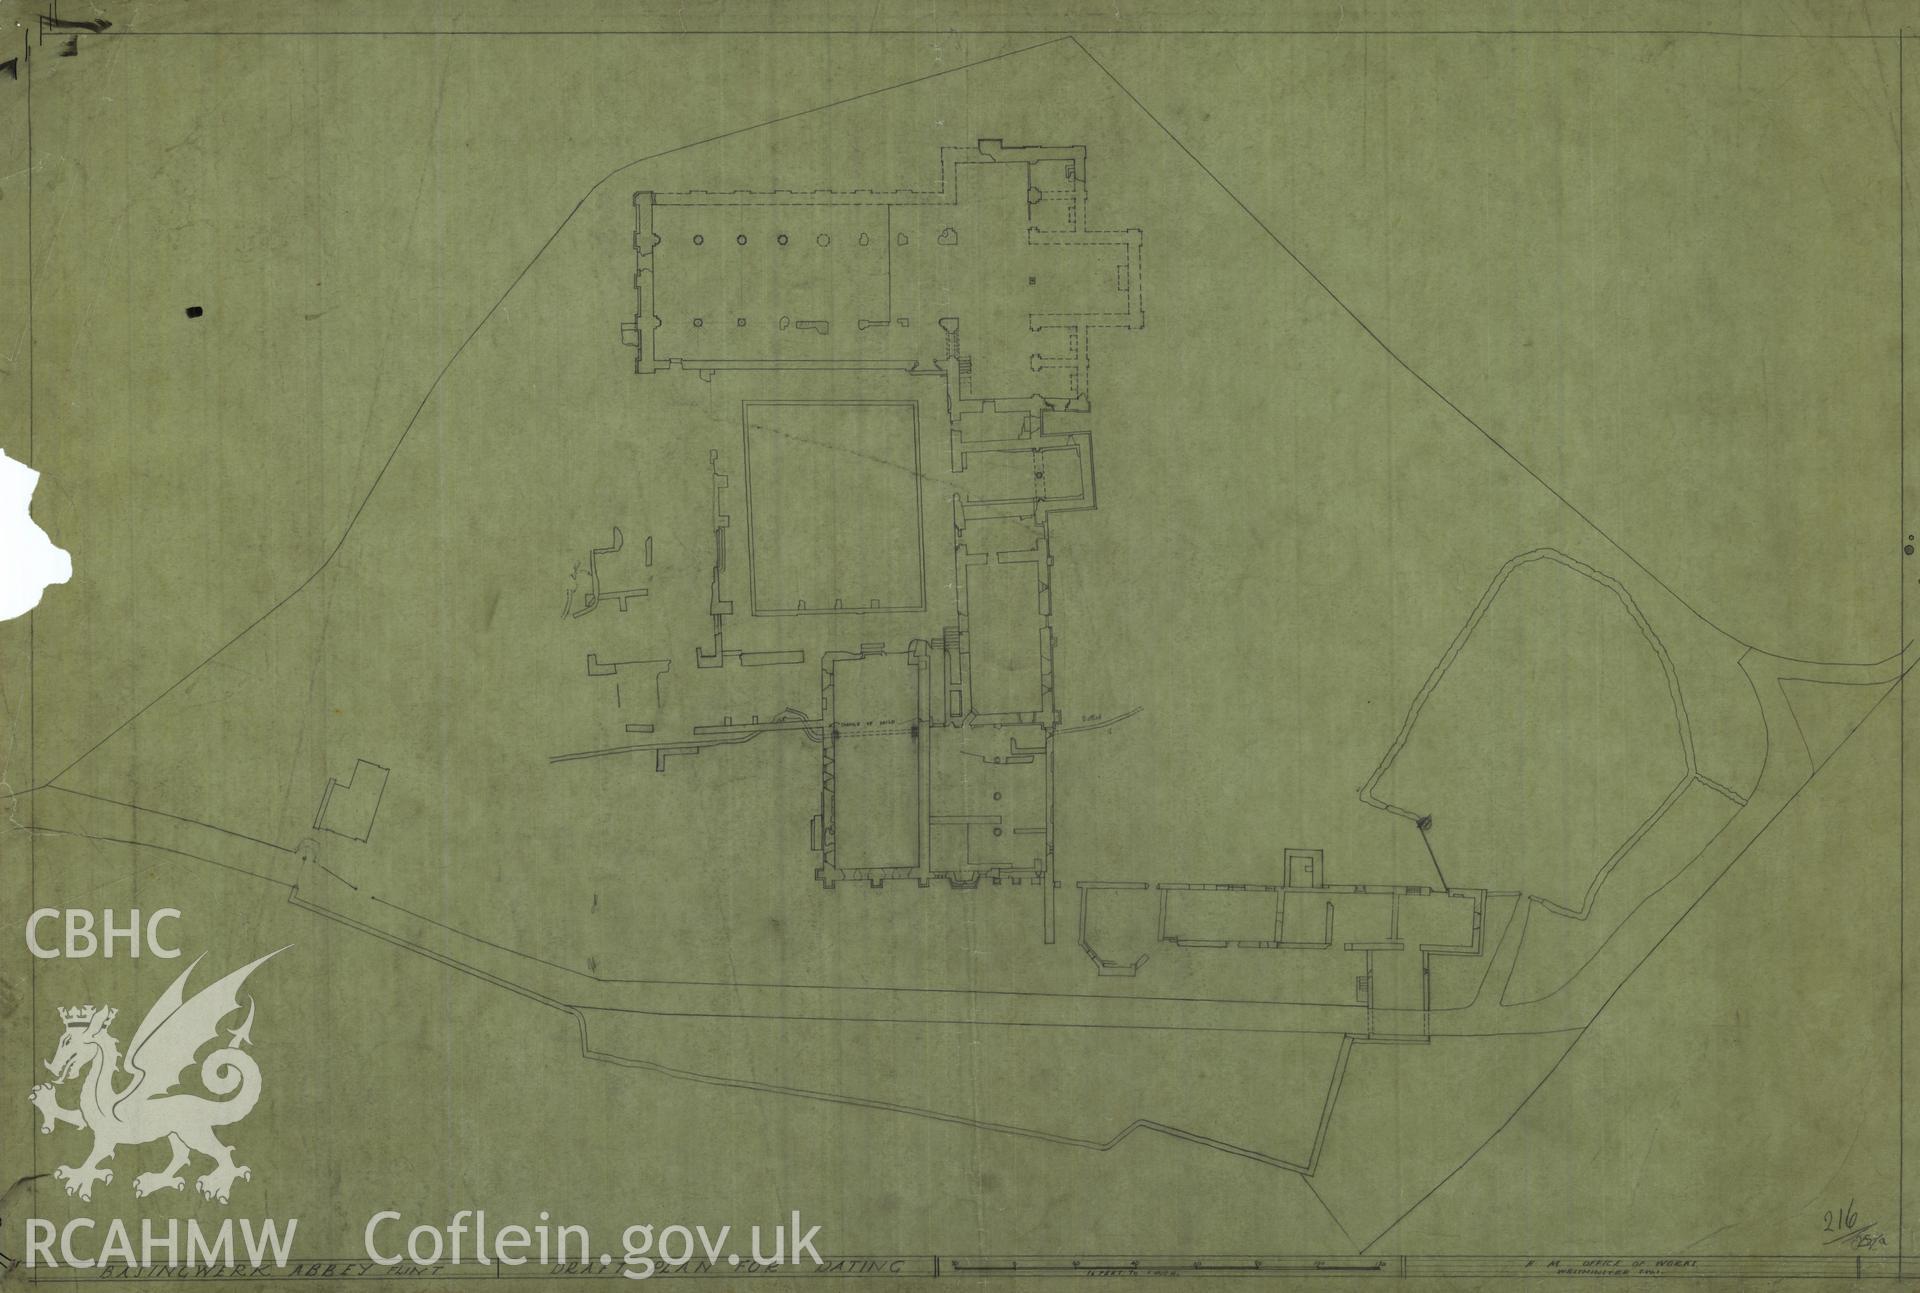 Cadw guardianship monument drawing of Basingwerk. Outline-plan for dating. Cadw Ref. No:216//25/a. Scale 1:192.